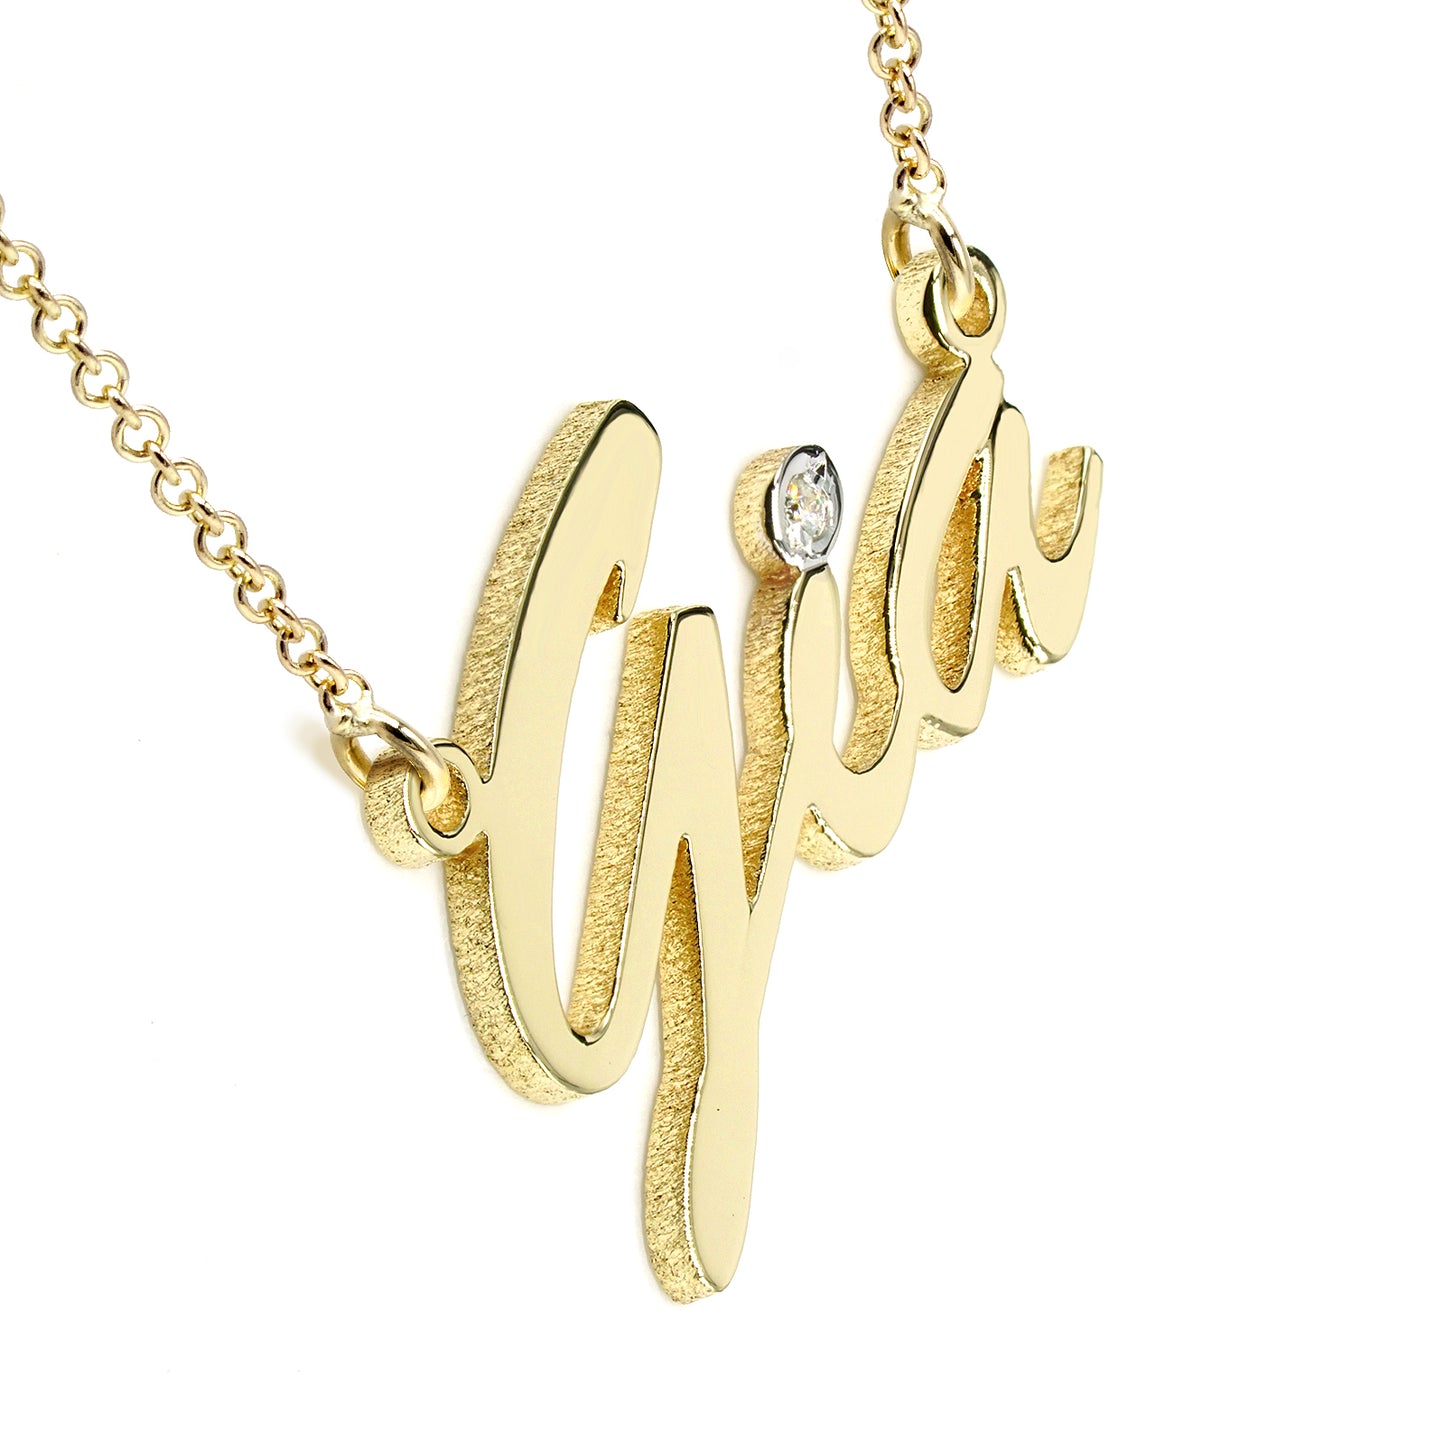 Custom 14K Gold and Diamond Name Necklace with Script Text